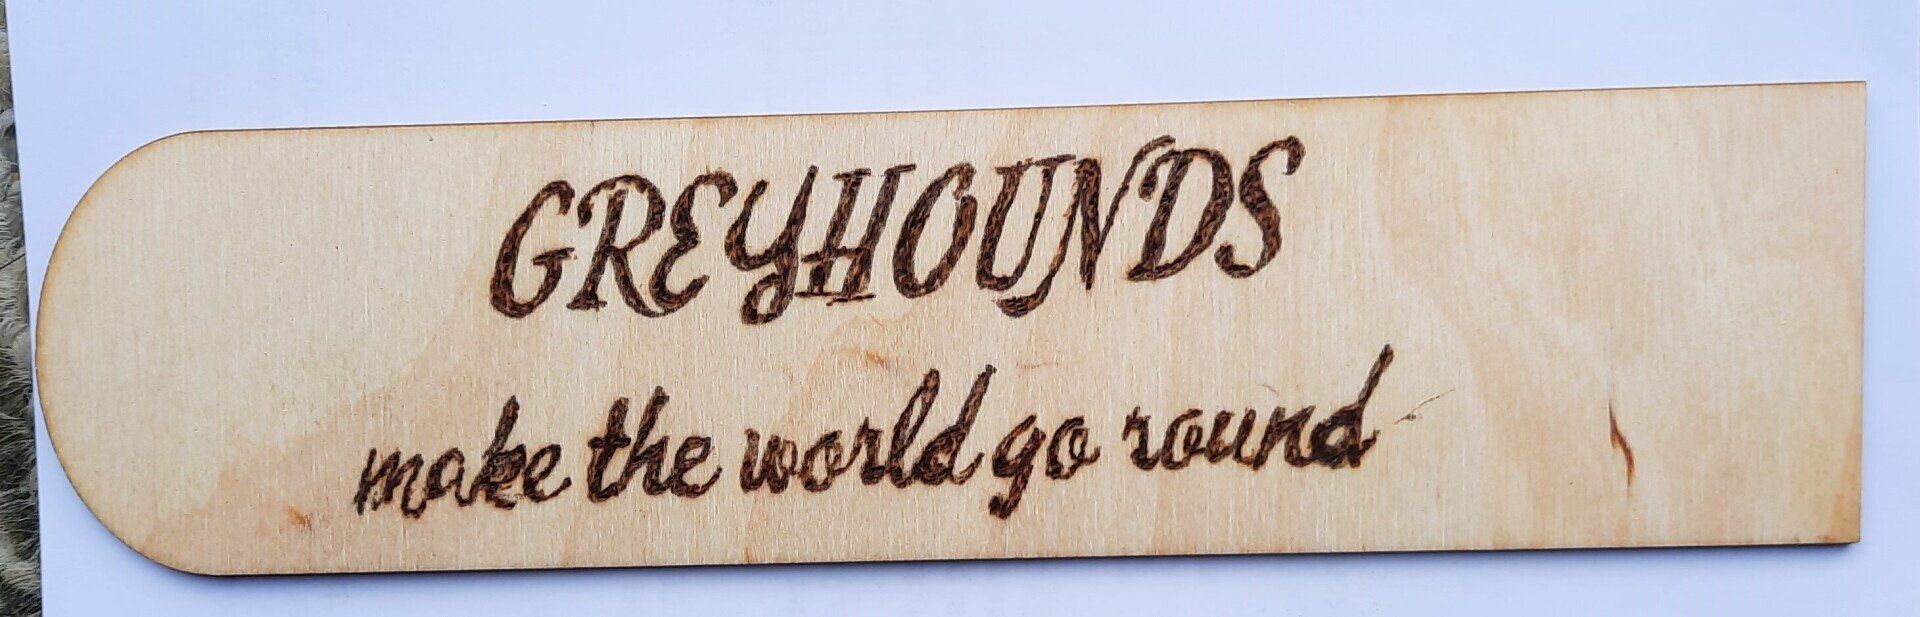 Greyhound, adoption, pet, bookmark, bookmarks, book, books, gifts, reading, wood, pyrography, gift, home